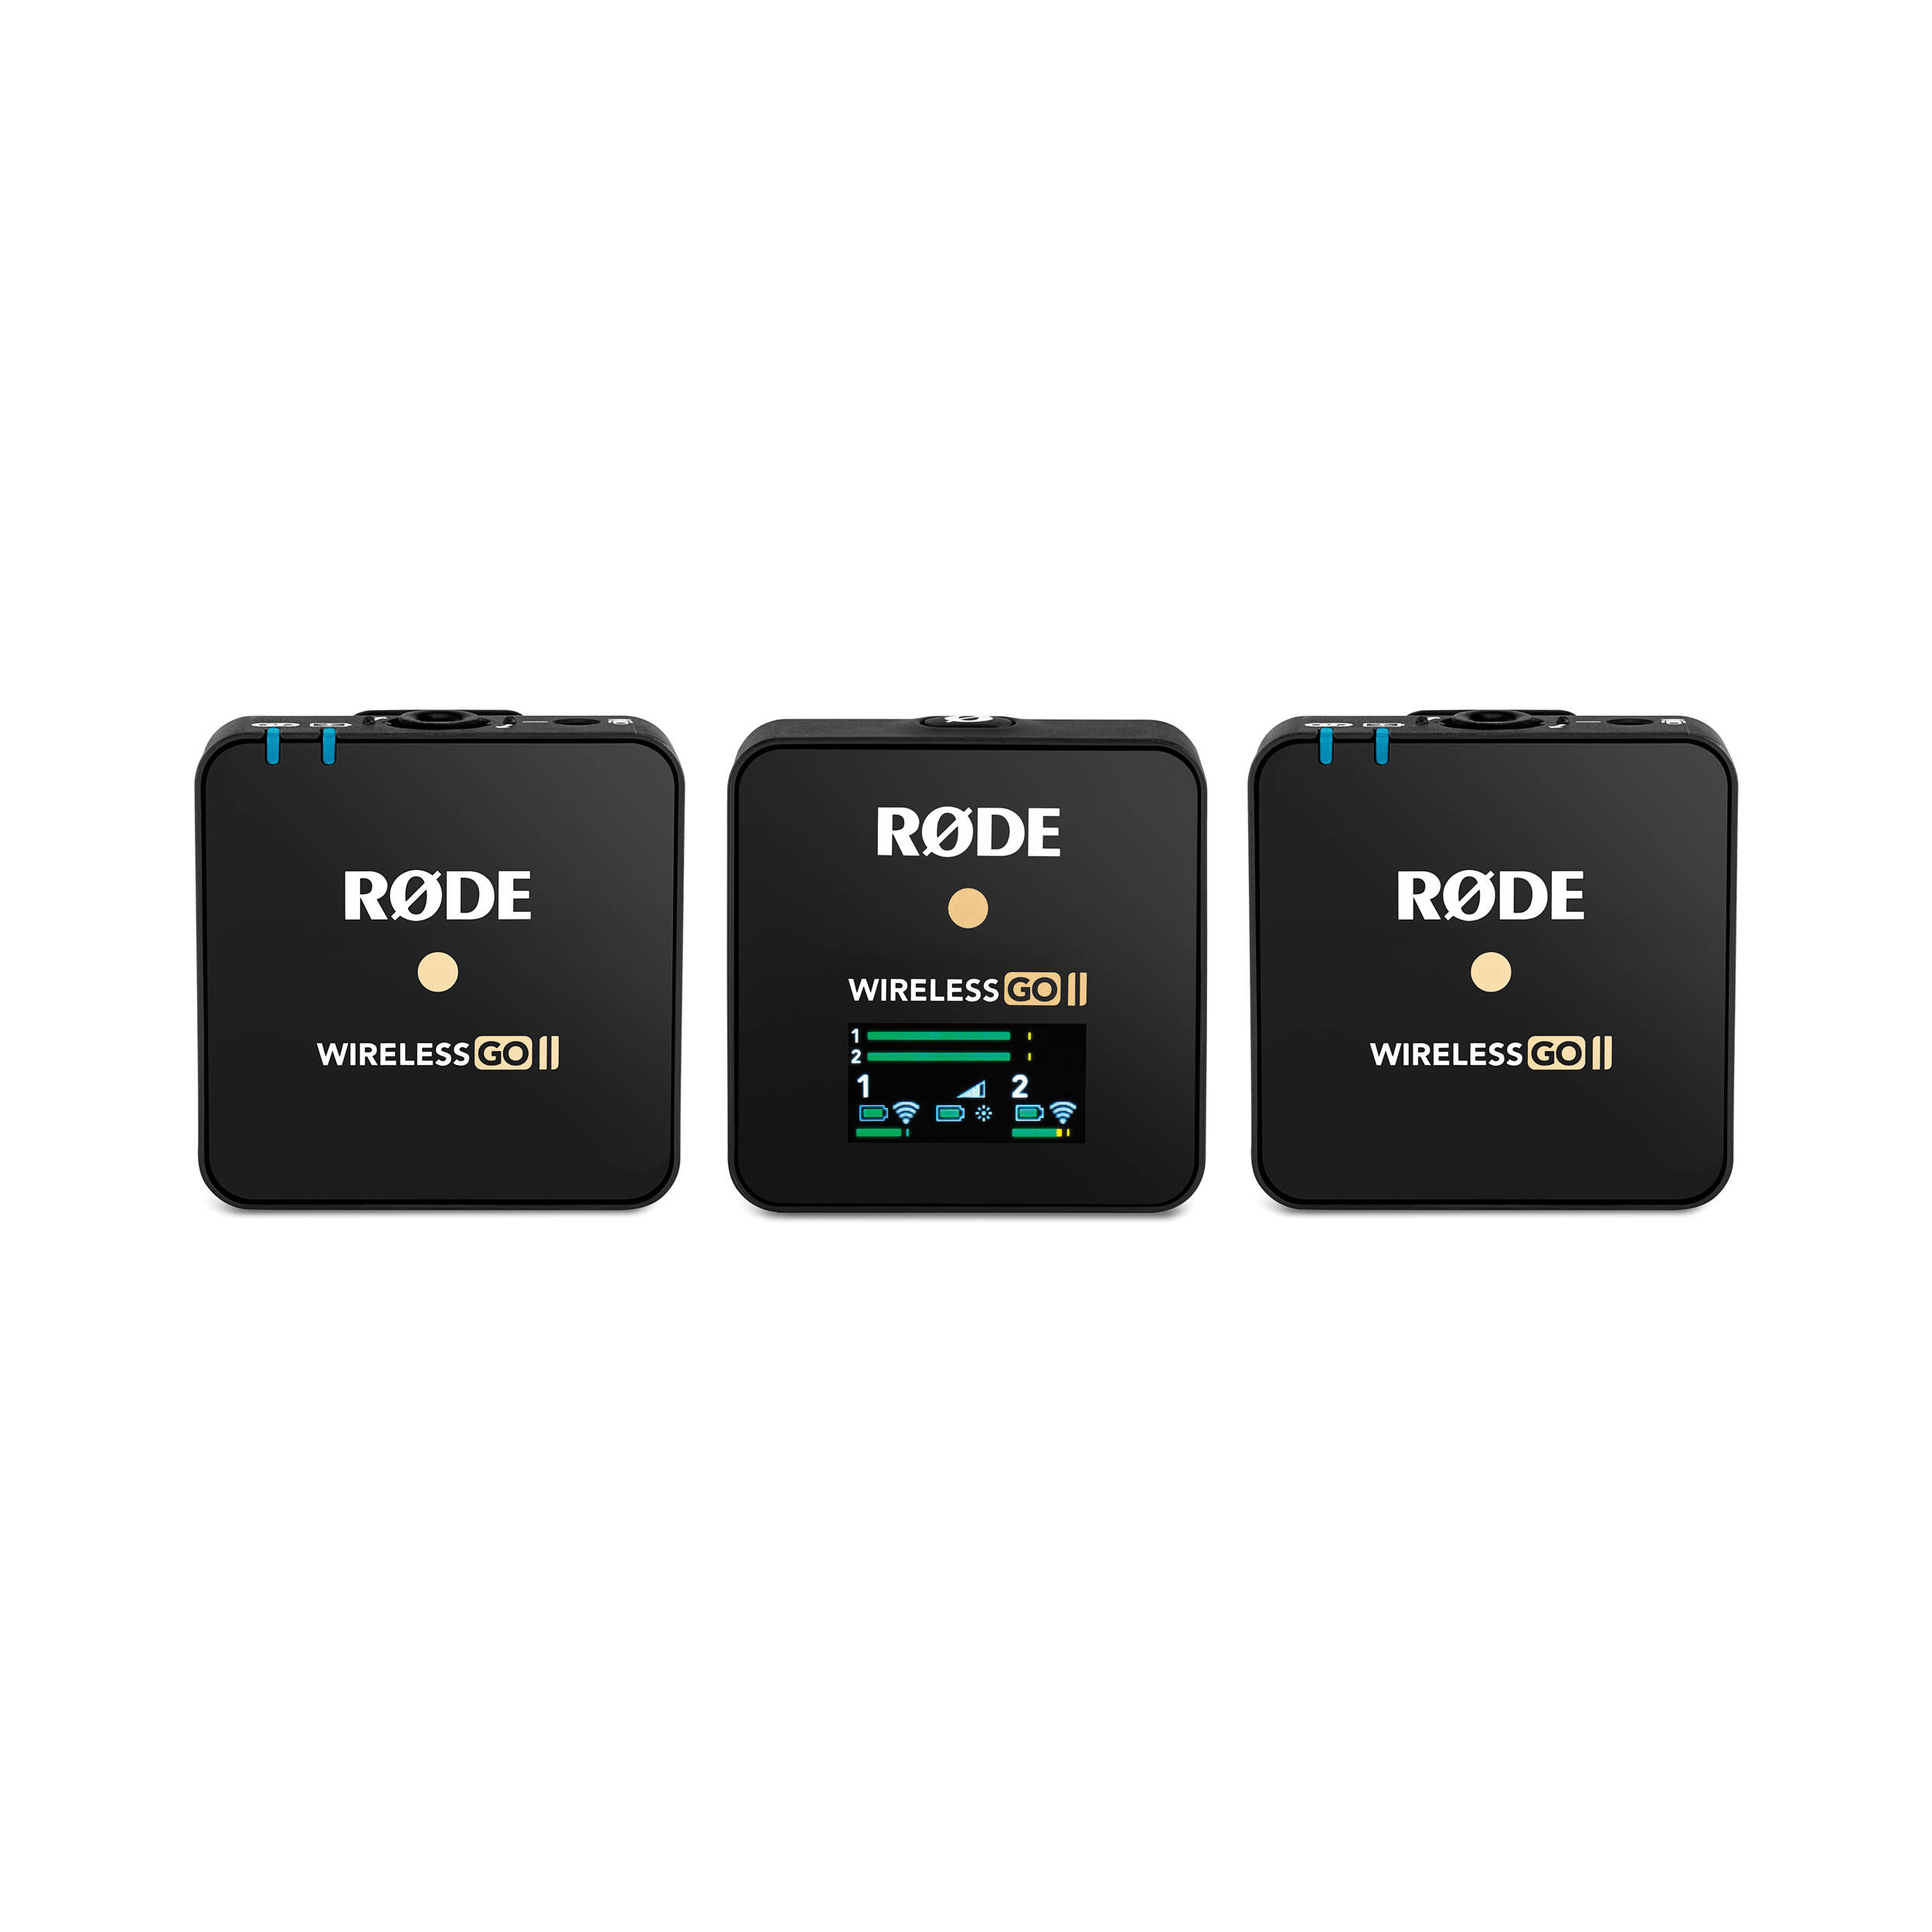 Rode Wireless GO II 2-Person Compact Digital Wireless Microphone System/Recorder (2.4 GHz, Black)-Damaged Box